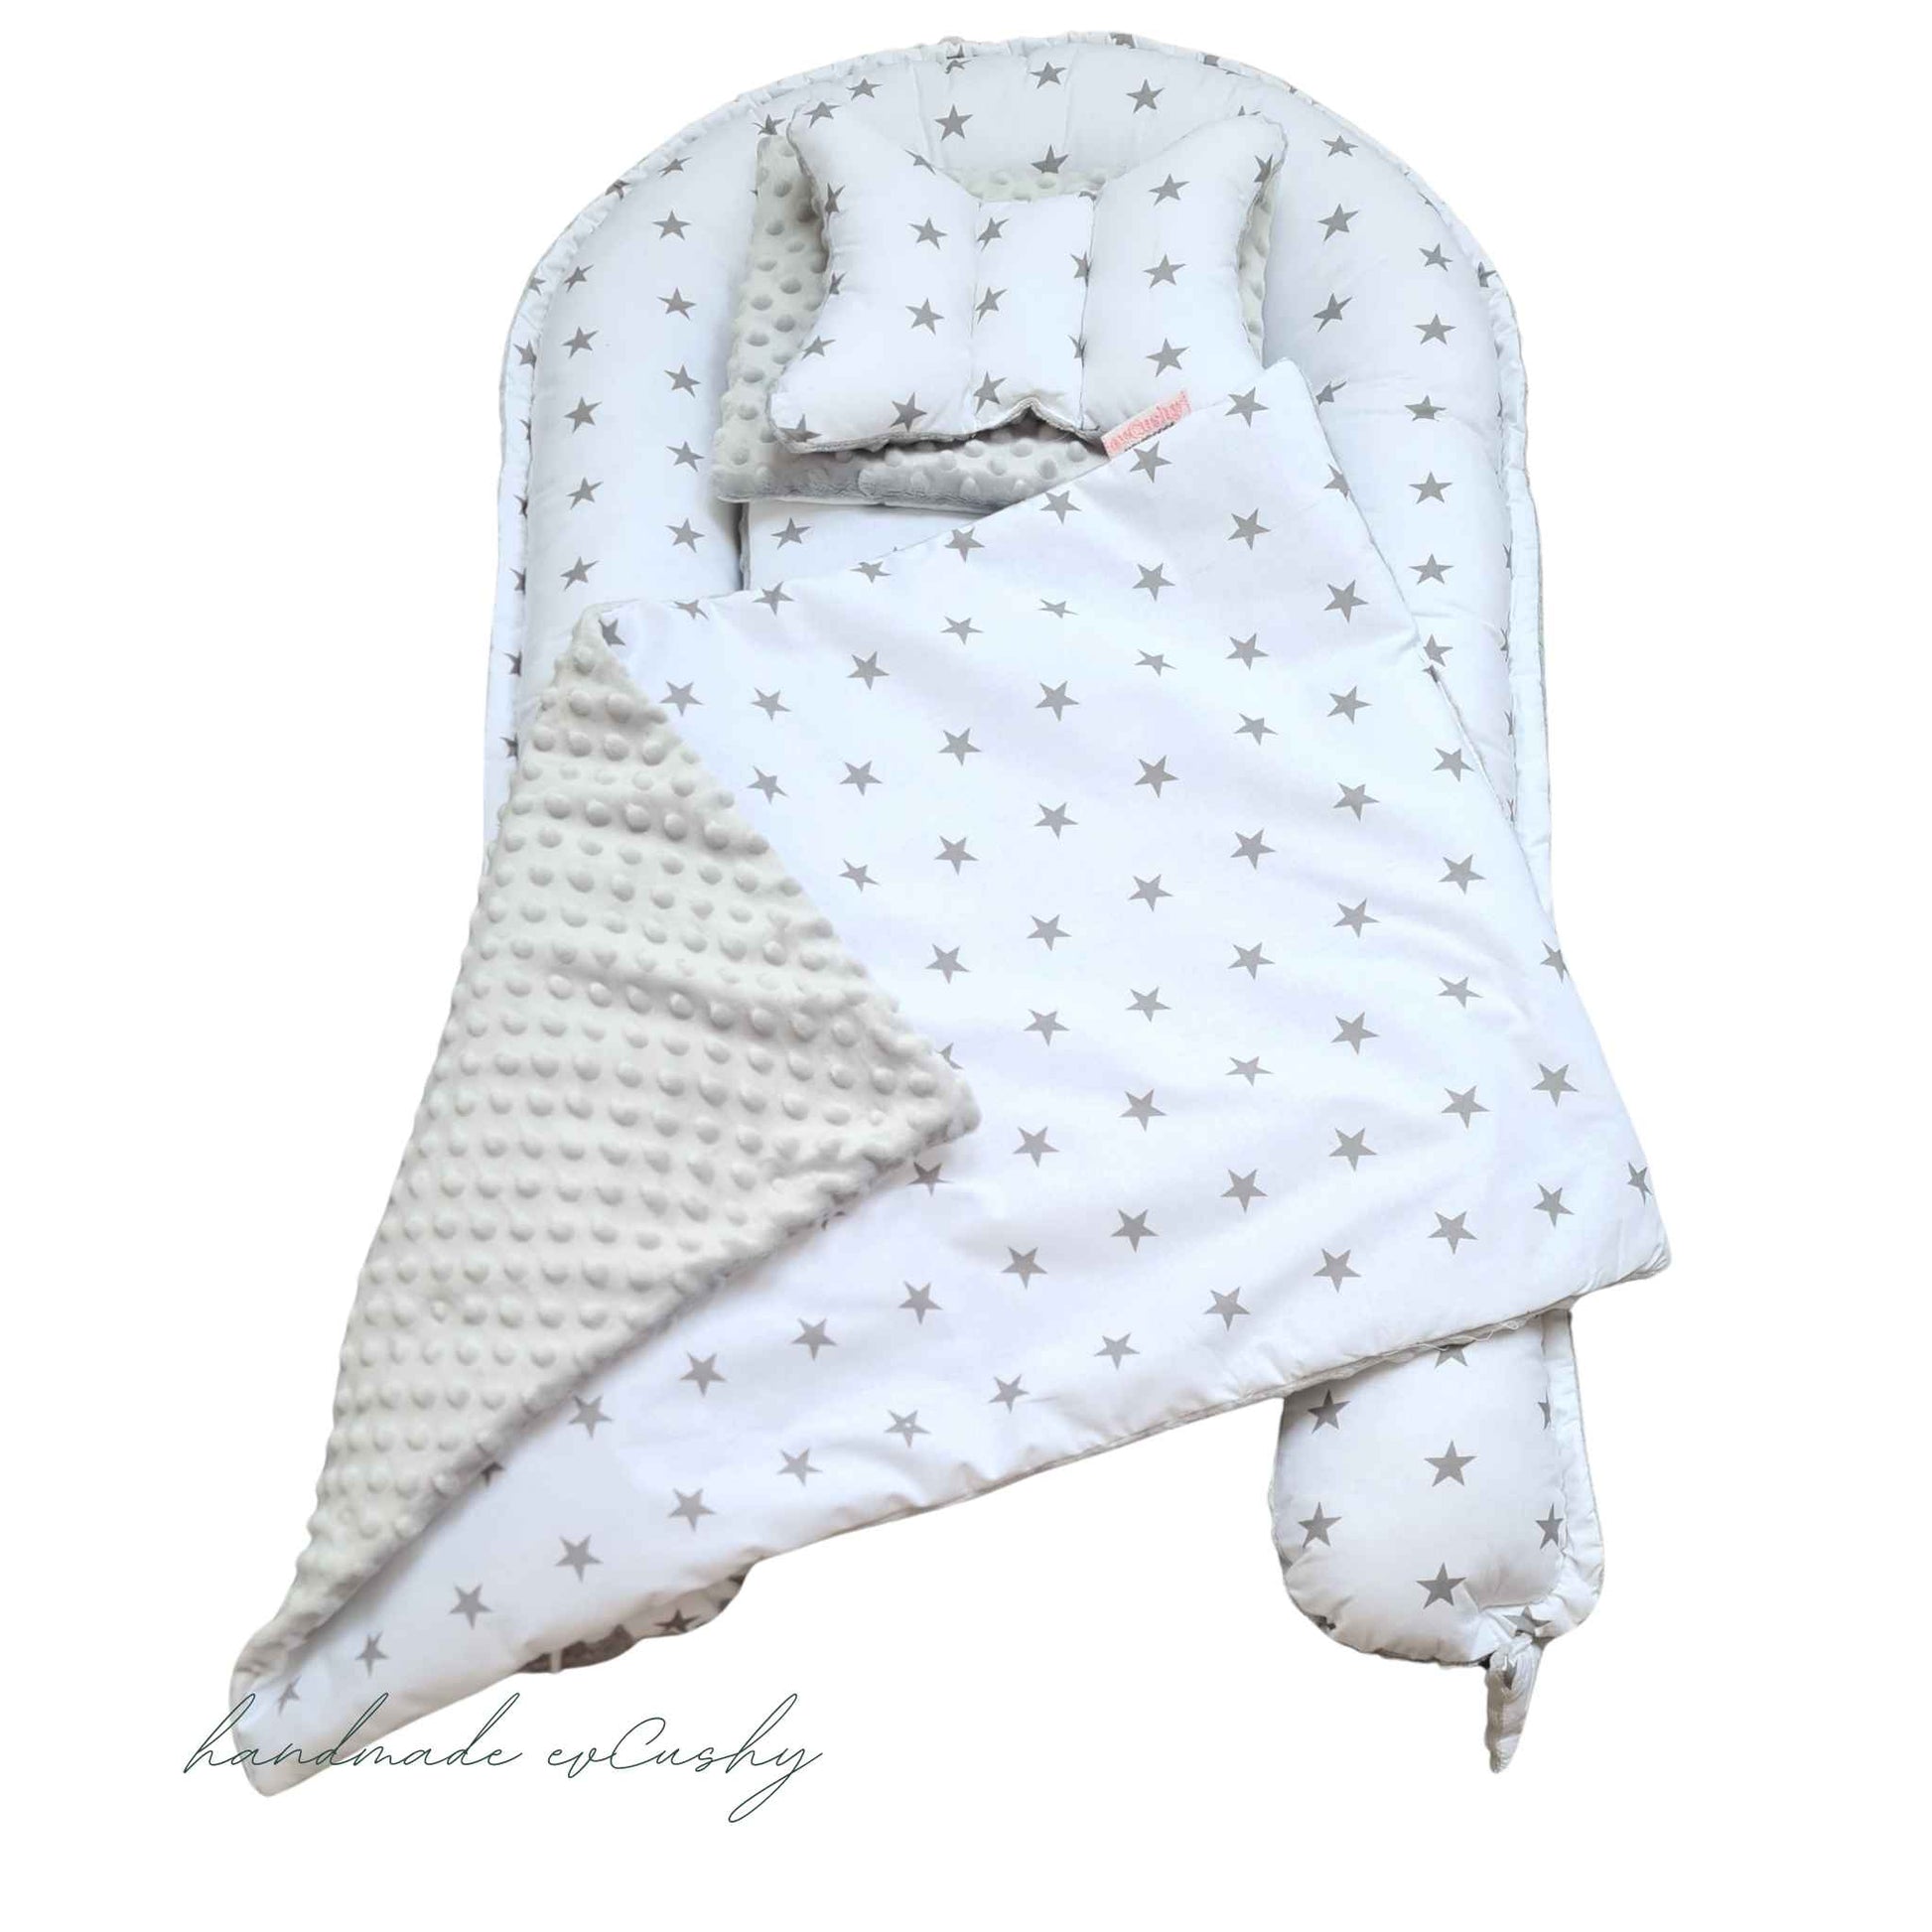 best baby nest with pillow and blanket white with grey stars and grey dimple fleece on reverse evcushy with blanket and pillow